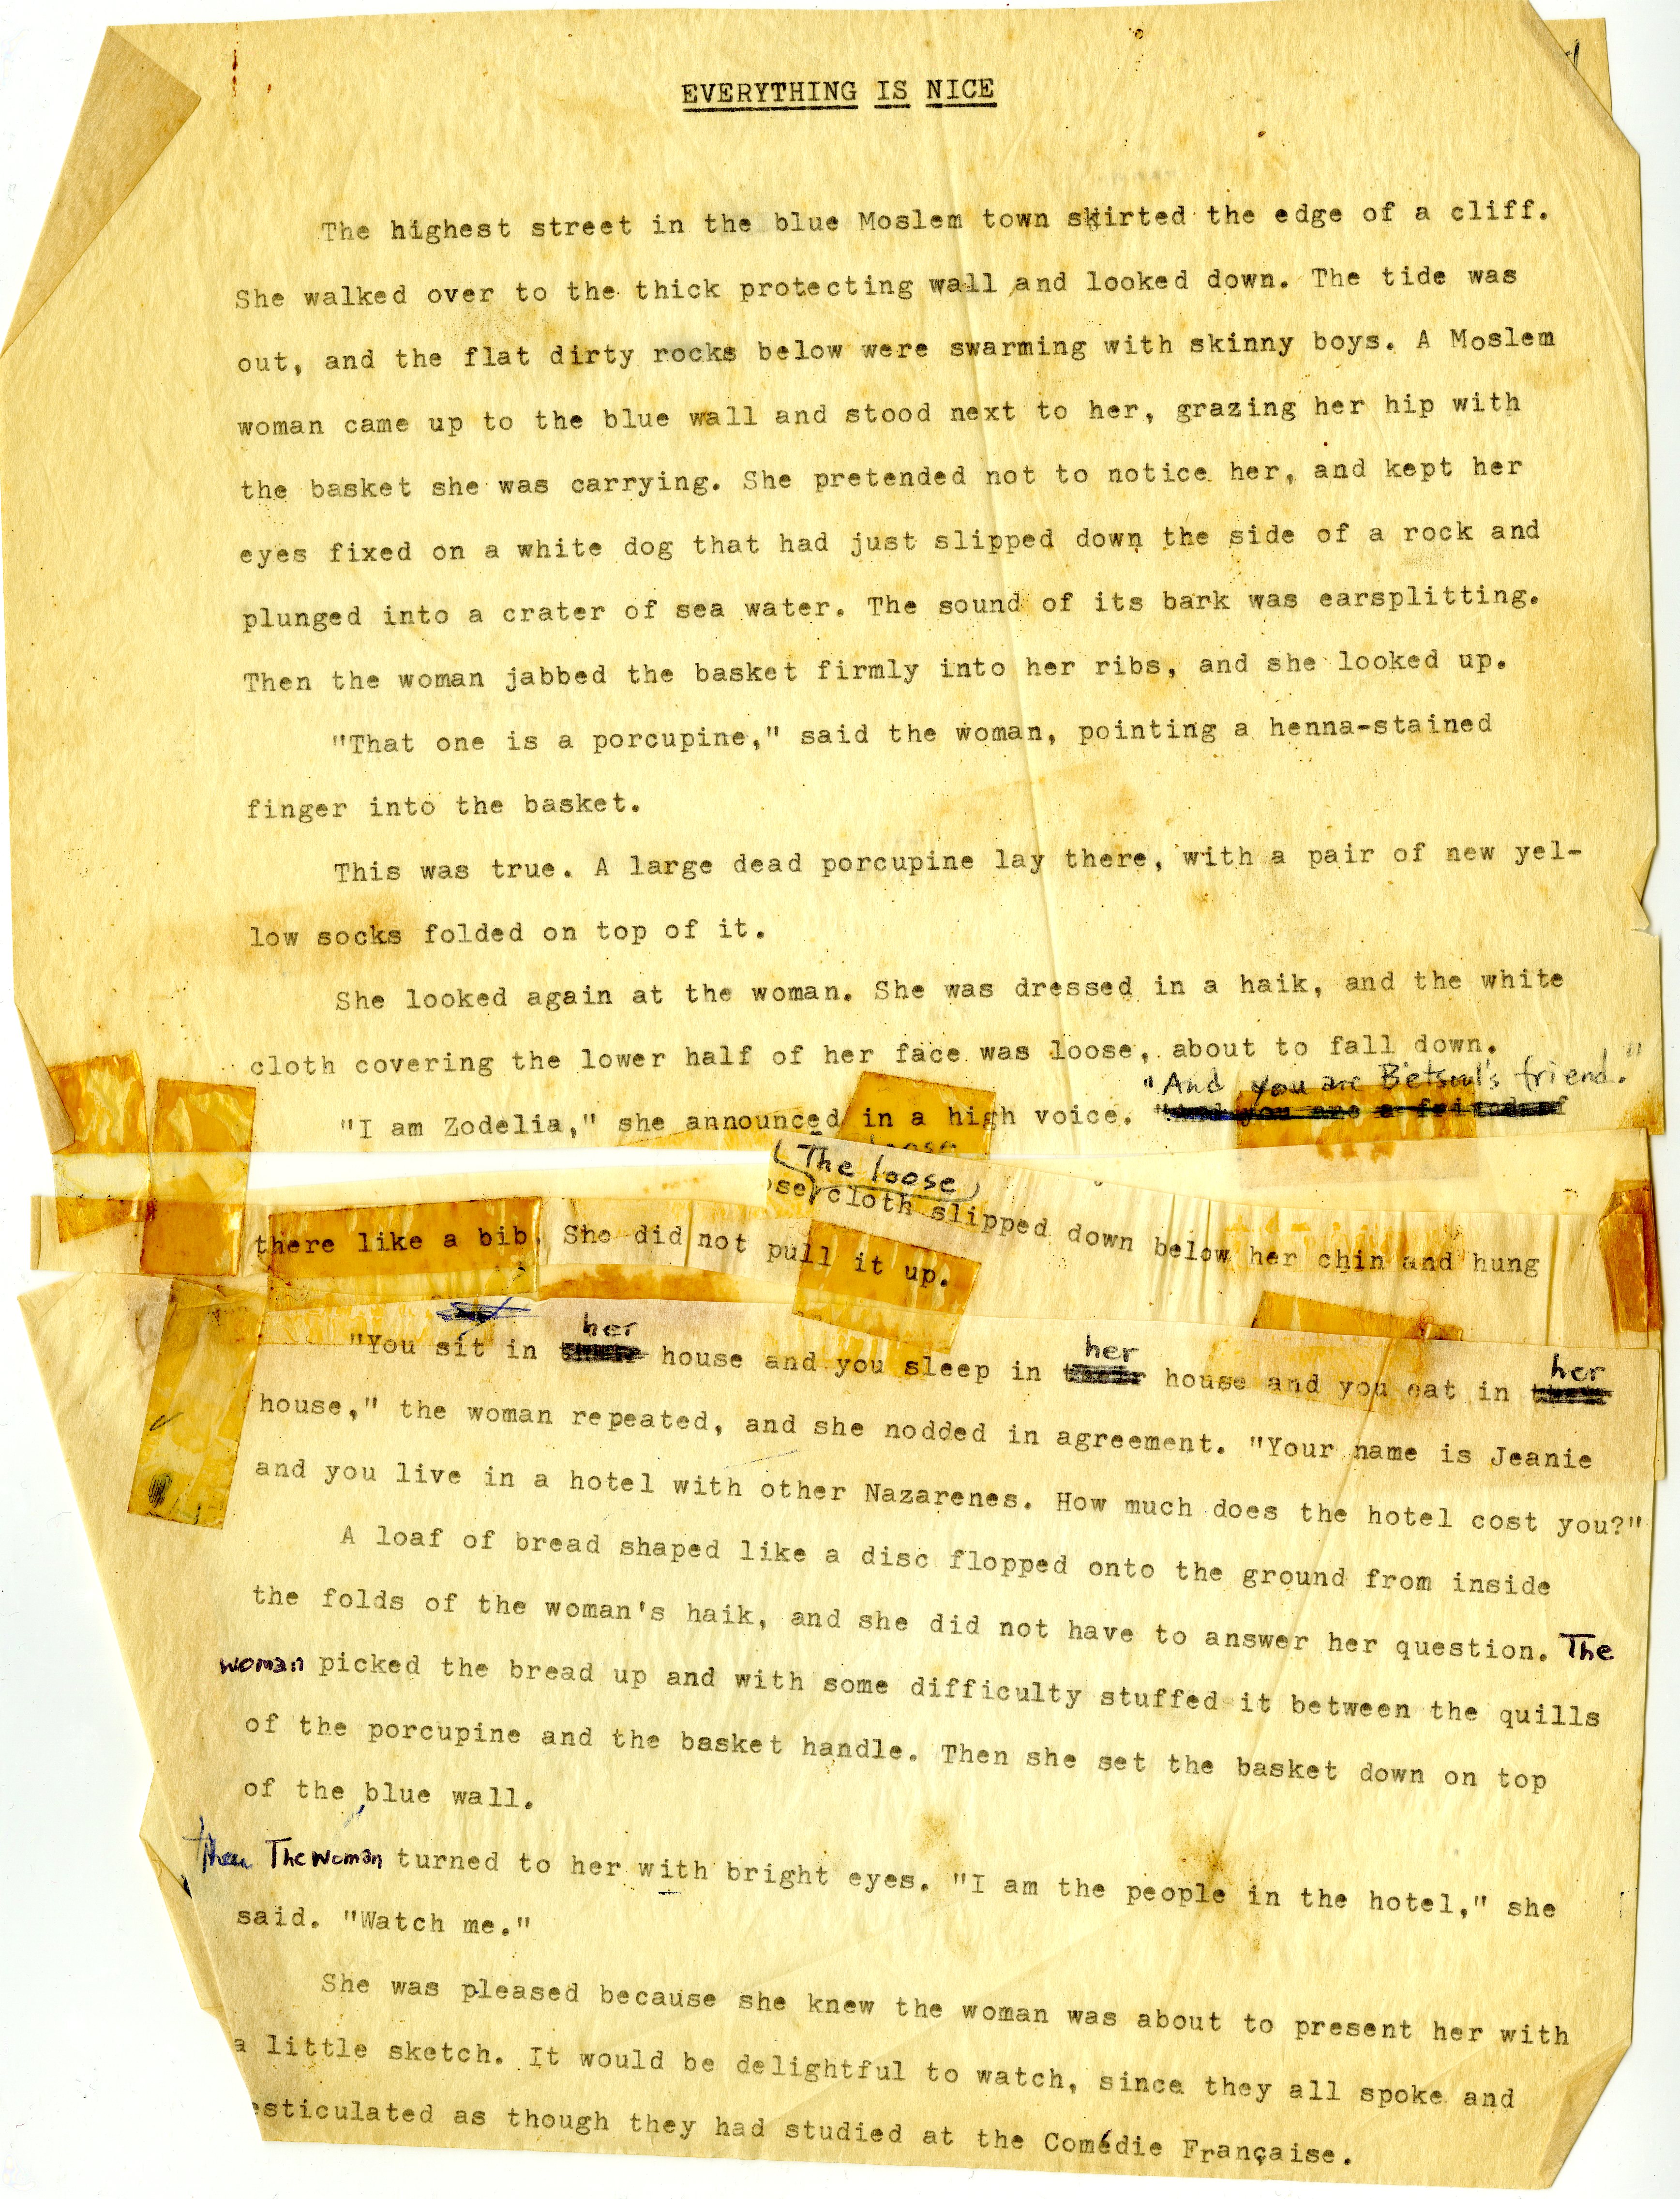 Bowles, Jane. “Everything is nice”: (story) typescript, undated, from the Paul Bowles papers